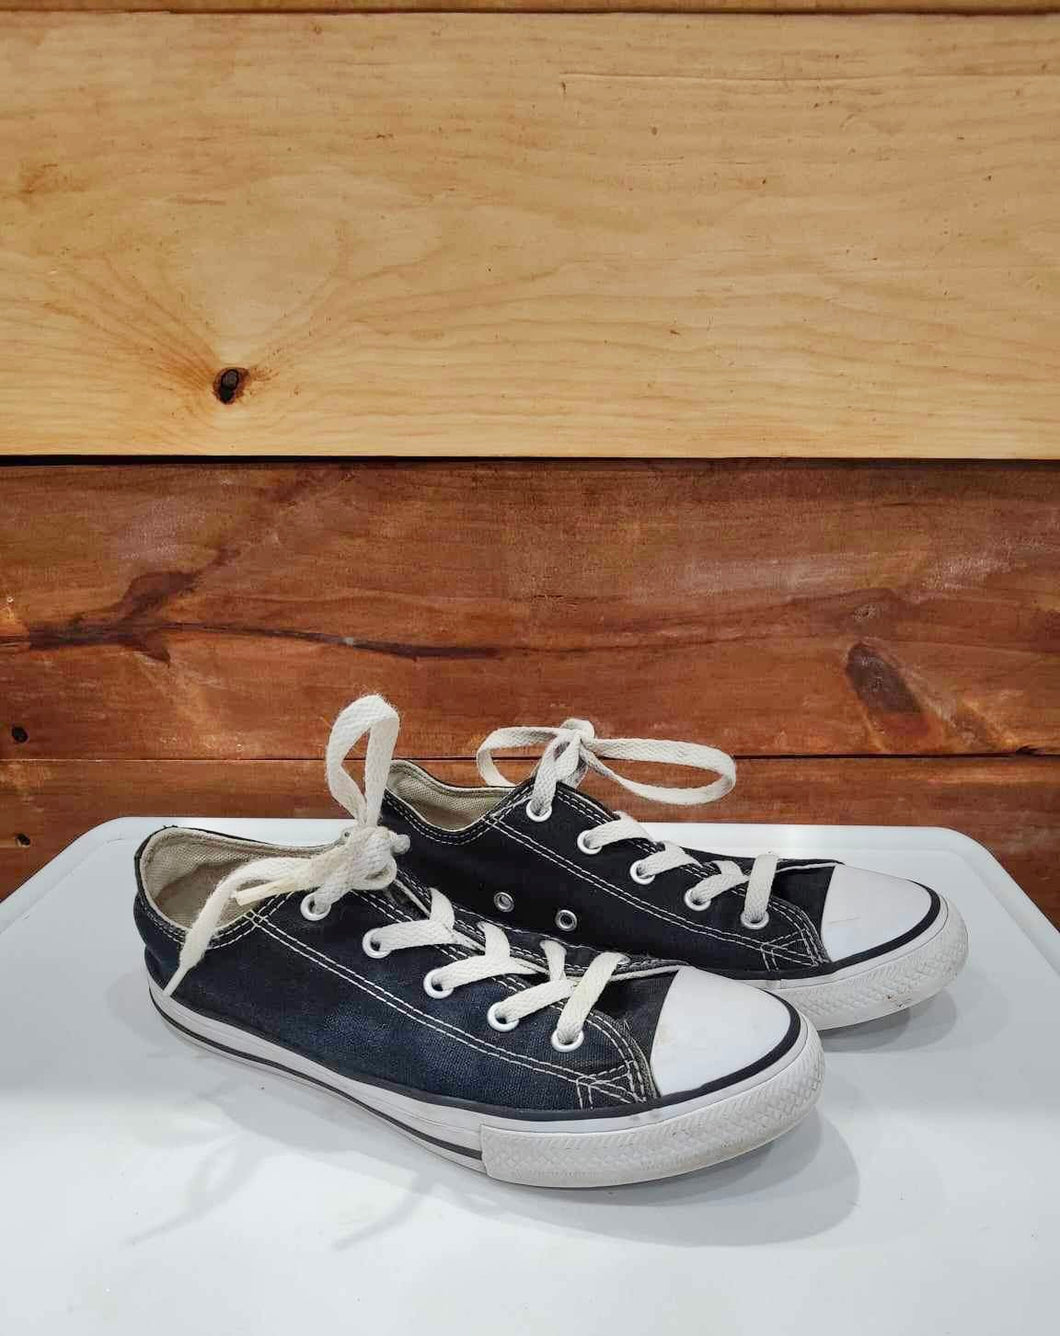 Converse Black Shoes Size 3 Youth